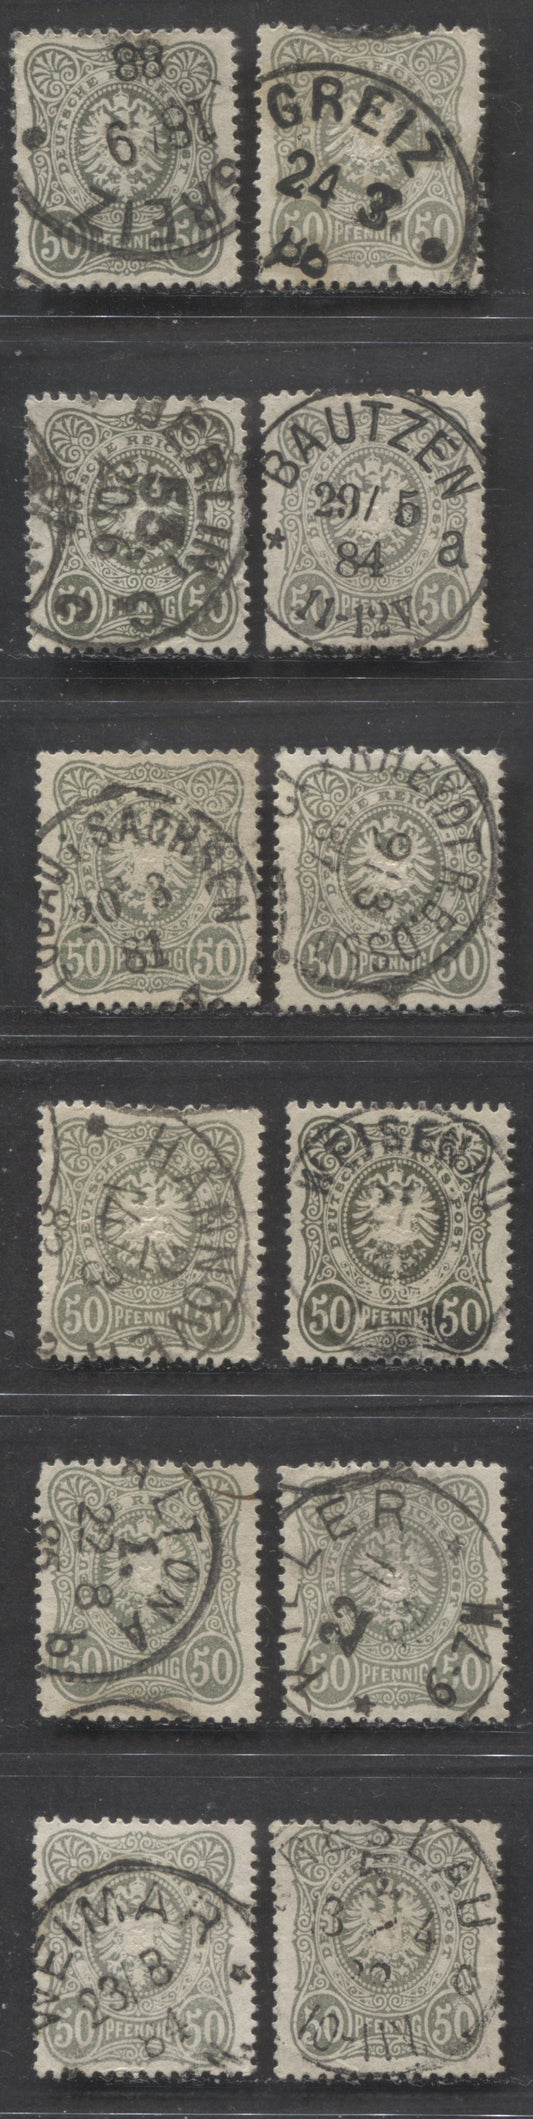 Lot 426 Germany SC#42 50pf Deep Greyish Olive Green, & Olive Green 1880-1883 Numeral & Eagle Pfenning Issue, All With SON Town Cancels, Including May 29, 1884 Bautzen In Almost Grey Shade, 12 VF Used Singles, Estimated Value $27